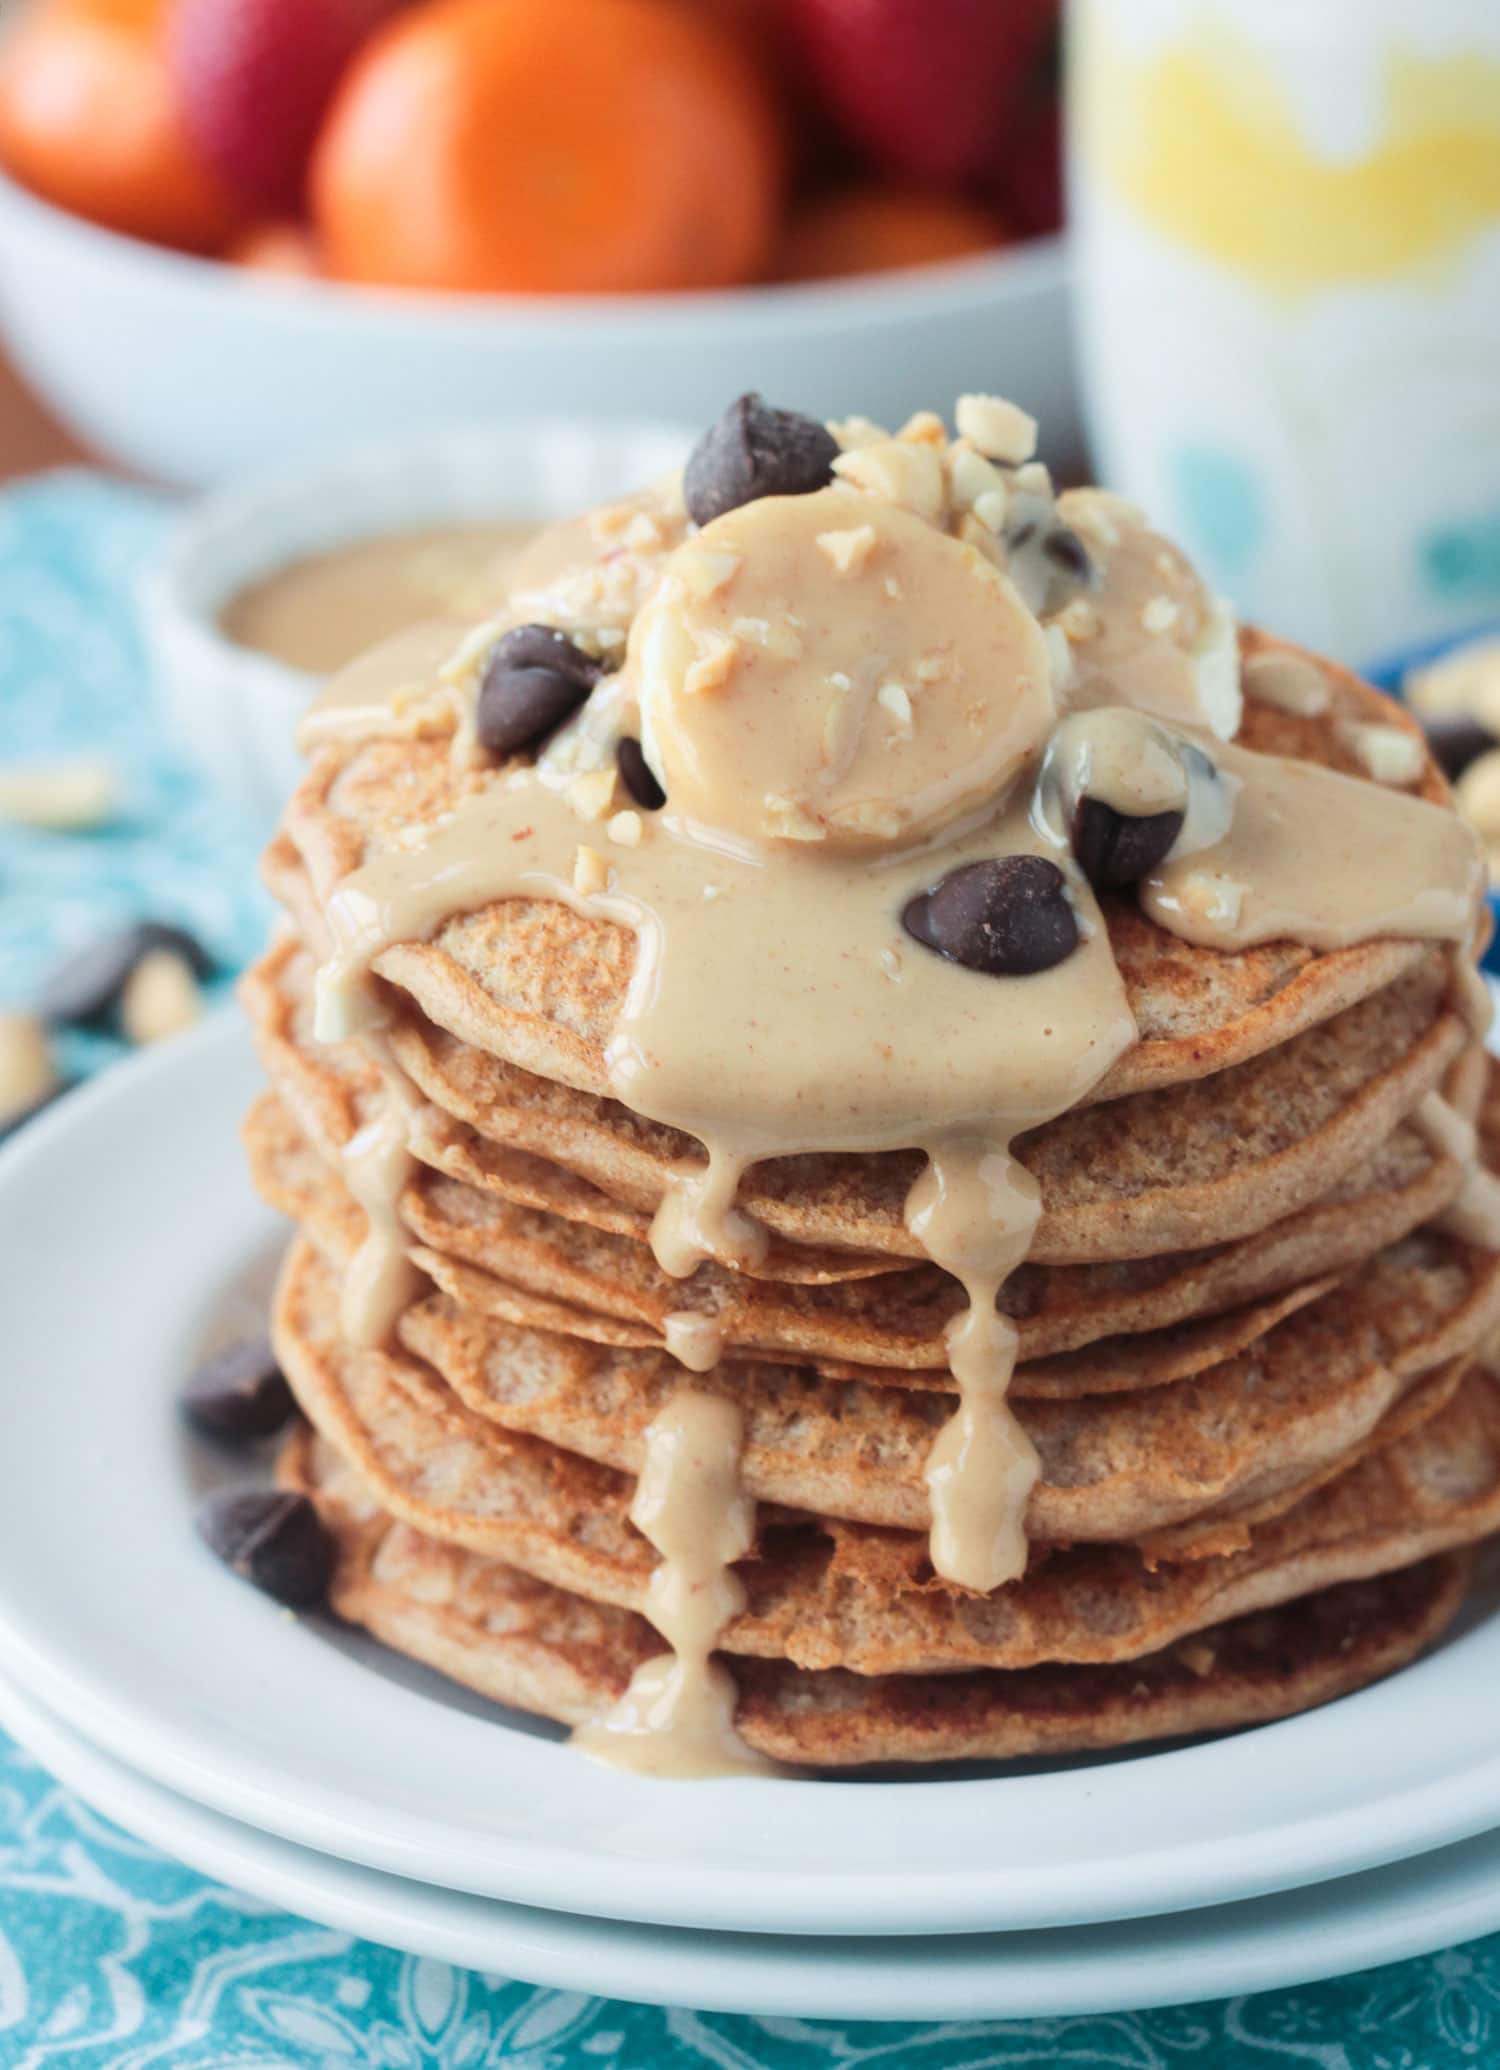 Stack of Peanut Butter Pancakes topped with banana slices, chocolate chips, crushed peanuts, and a maple peanut butter syrup.